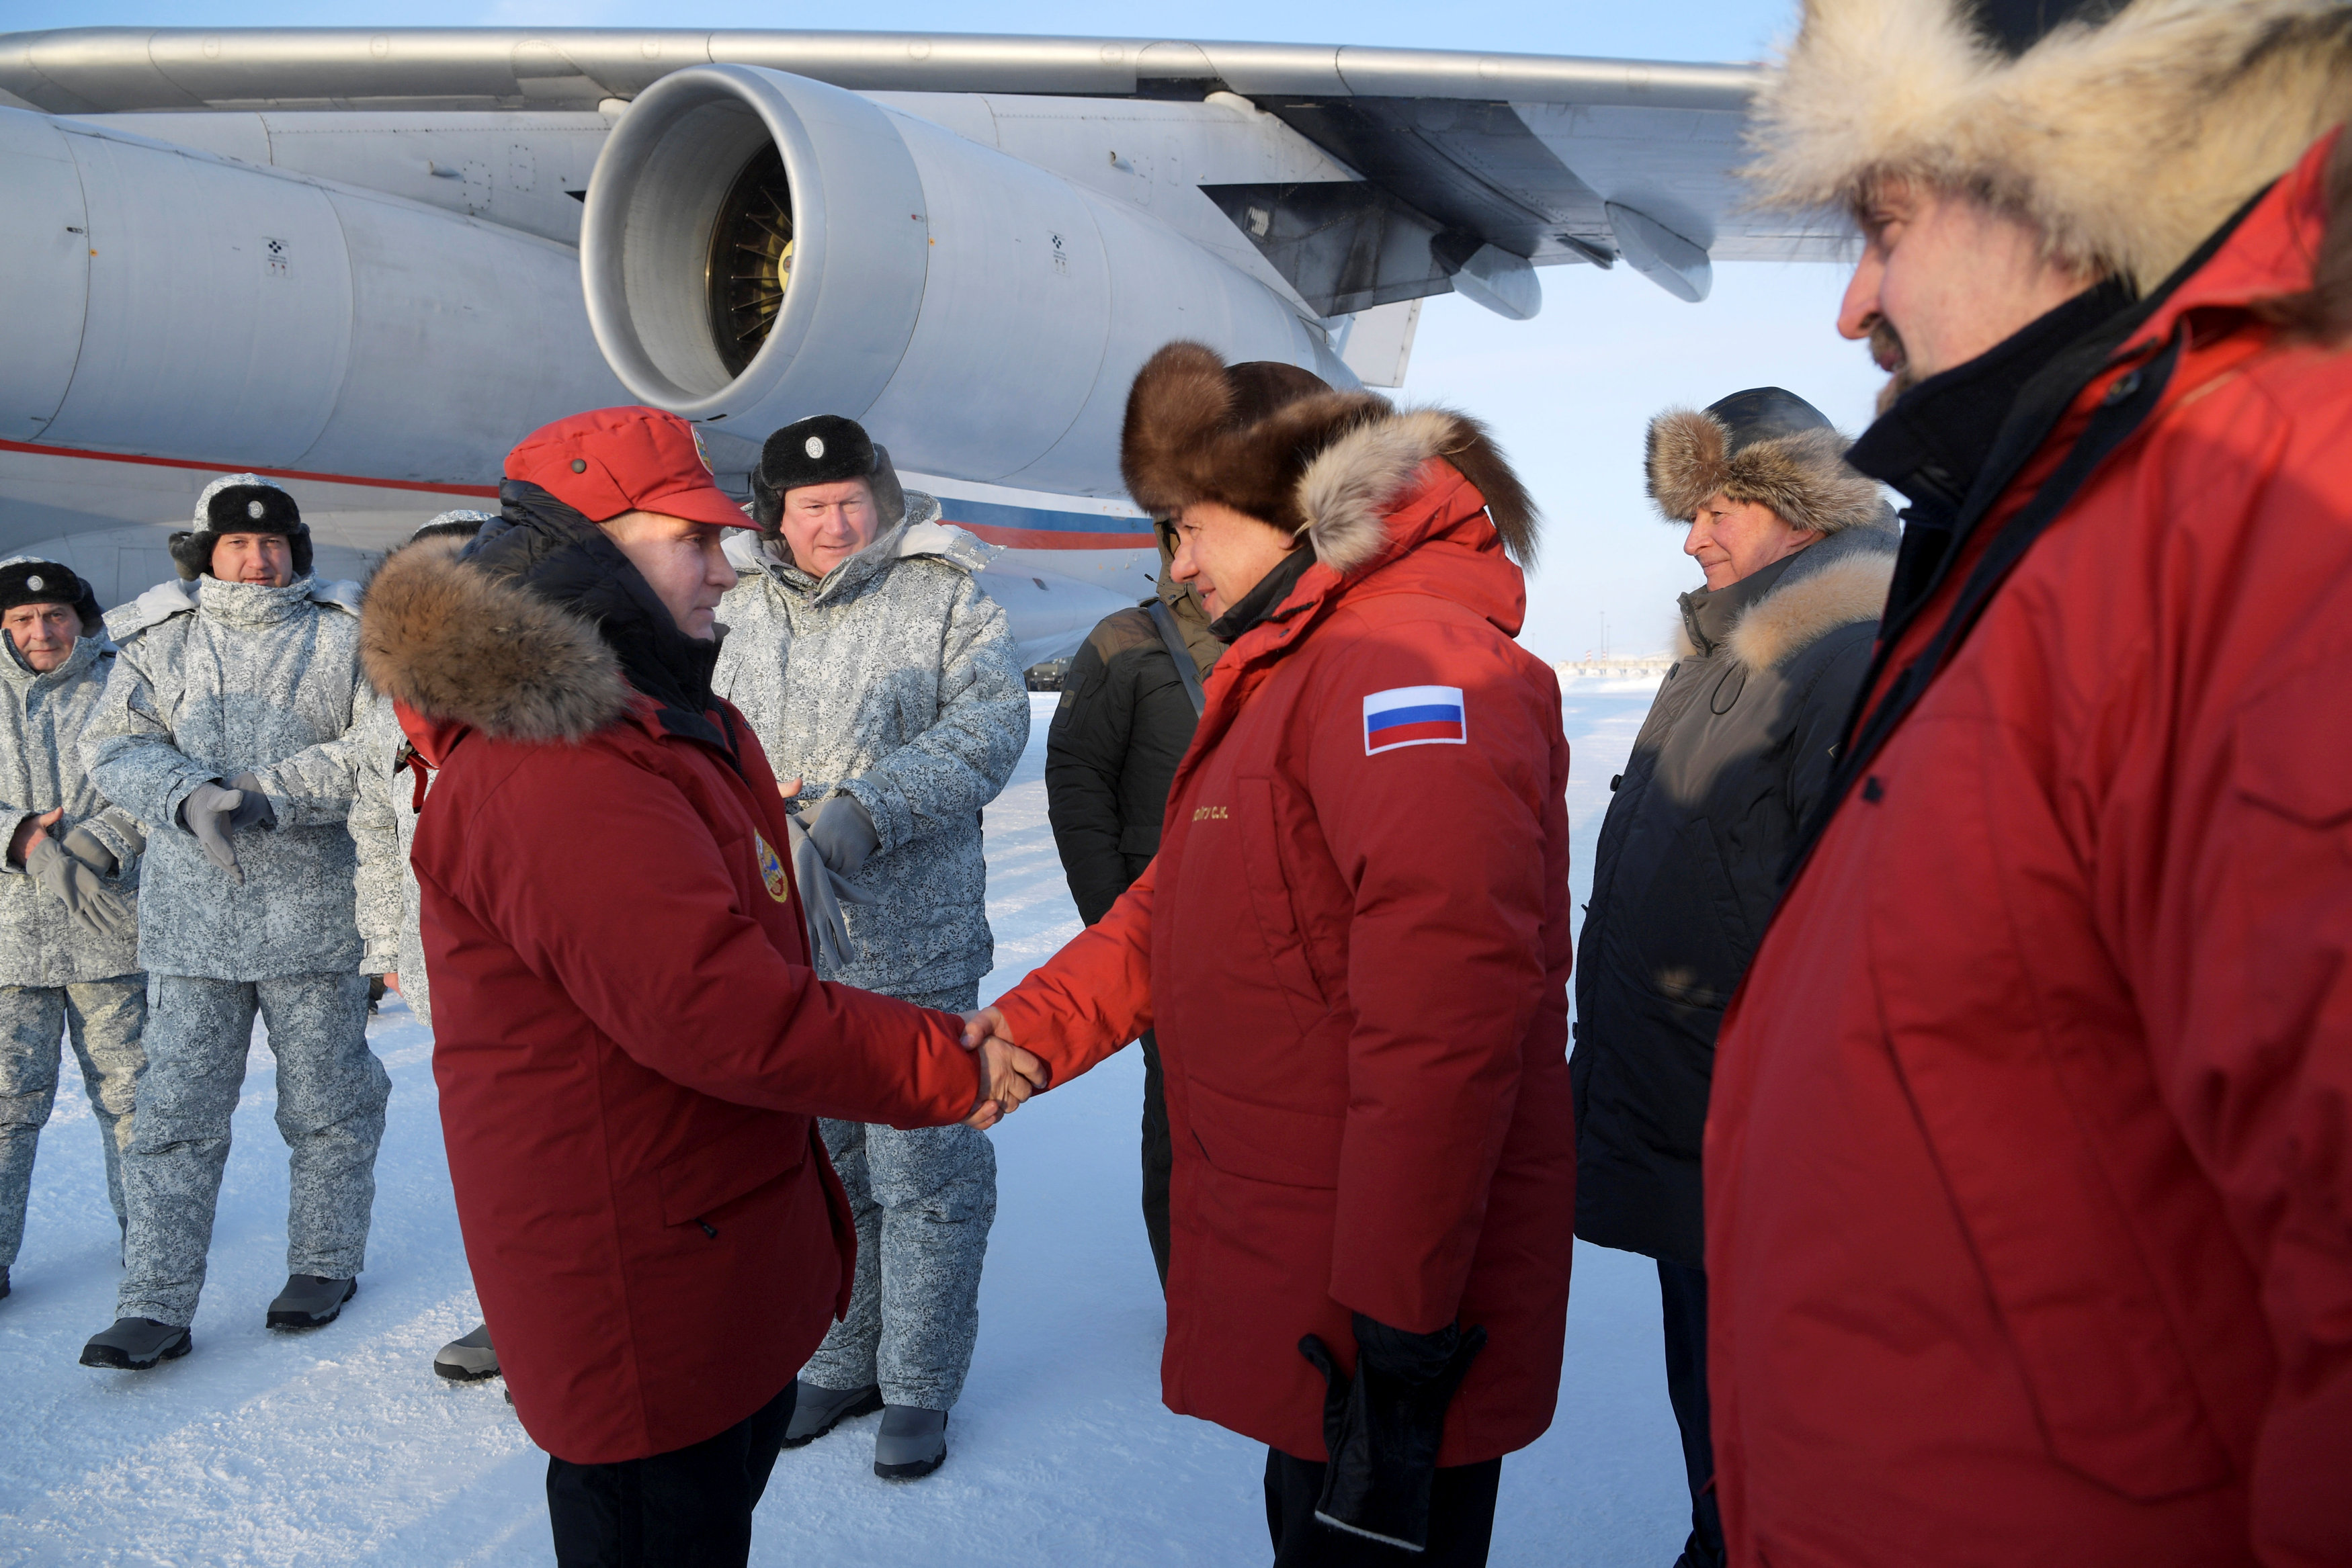 Russian President Vladimir Putin is welcomed by Defence Minister Sergei Shoigu, Natural Resources Minister Sergei Donskoi and Sergei Ivanov, Putin's special representative on questions of ecology and transport, upon his arrival to the remote Arctic islands of Franz Josef Land, Russia March 29, 2017. Sputnik/Alexei Druzhinin/Kremlin via REUTERS